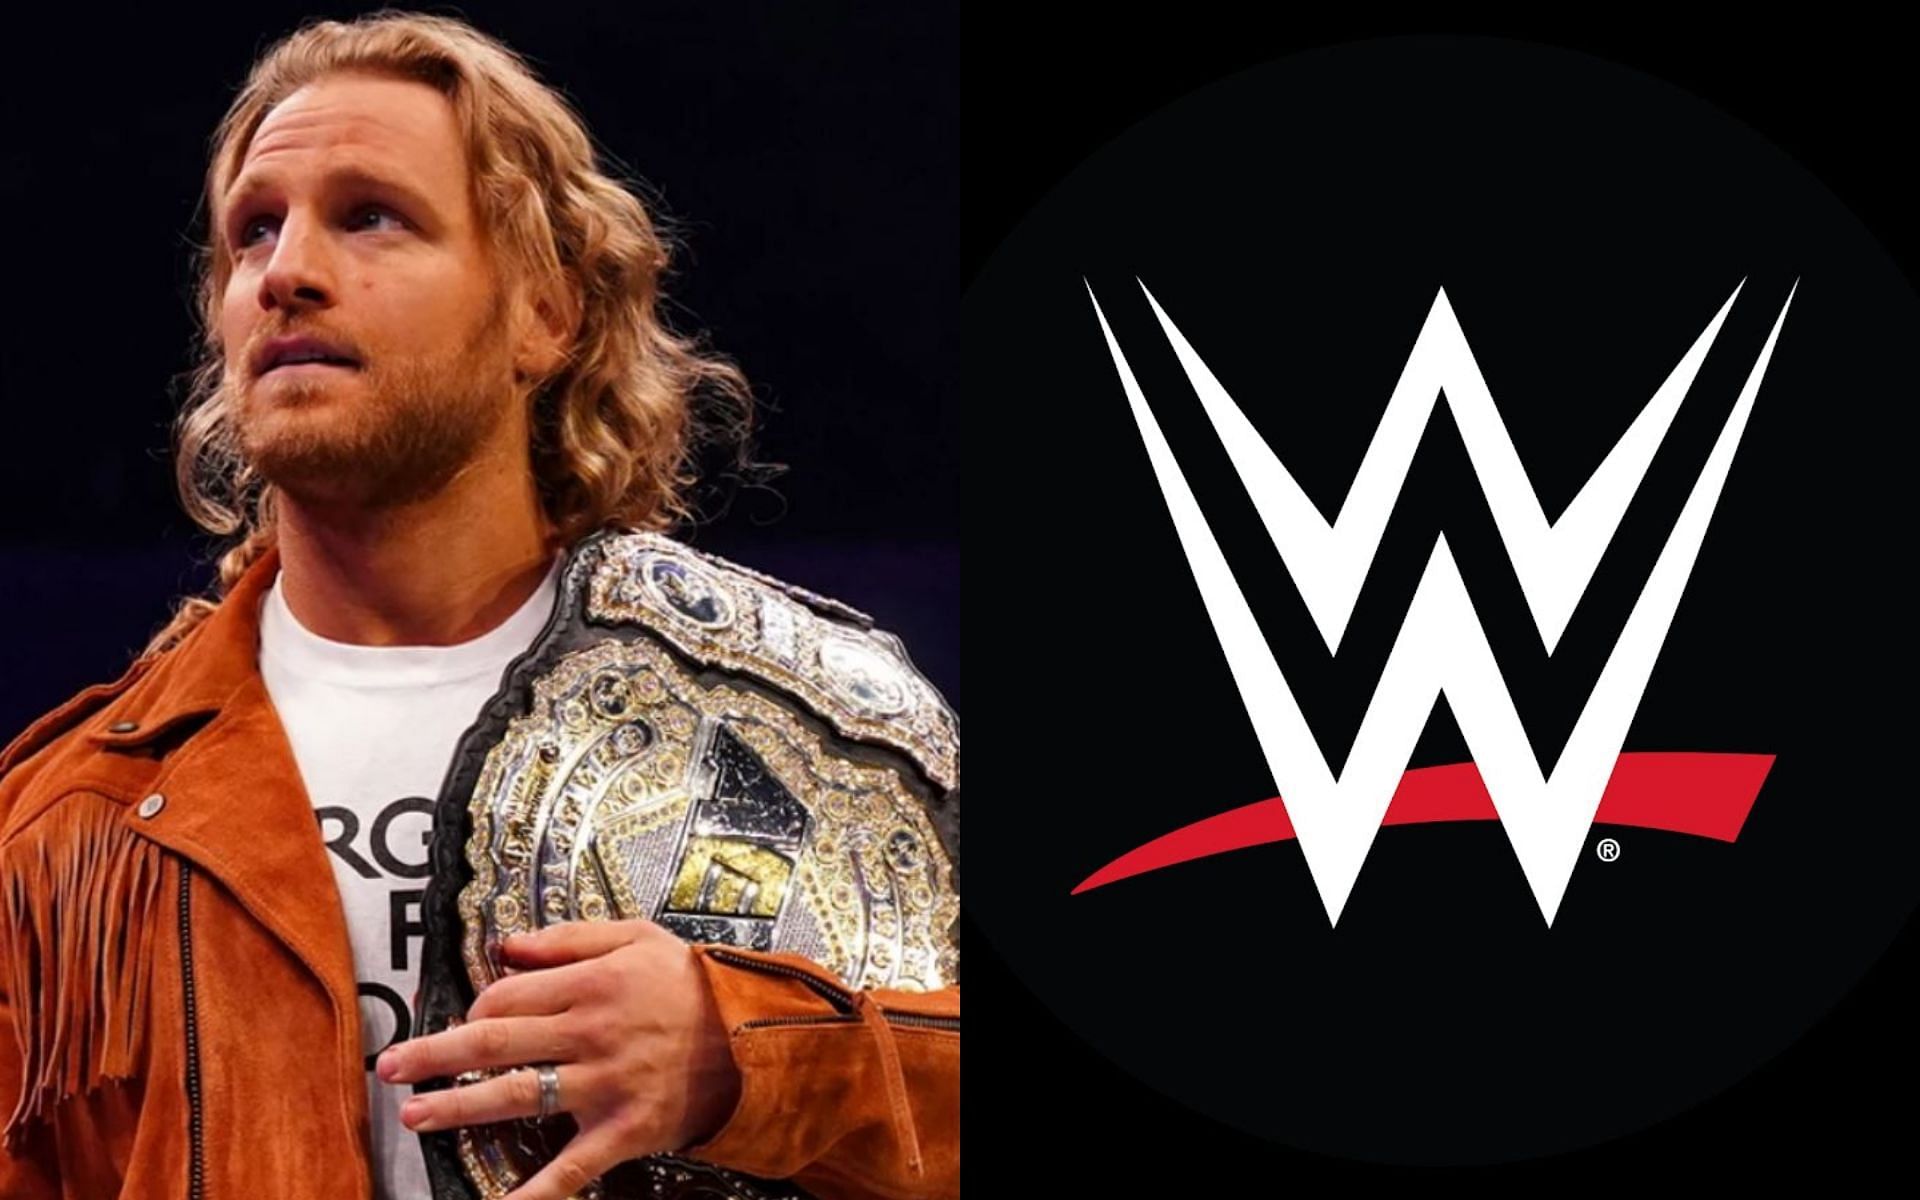 Former AEW World Champion Hangman Page was praised by this WWE legend.